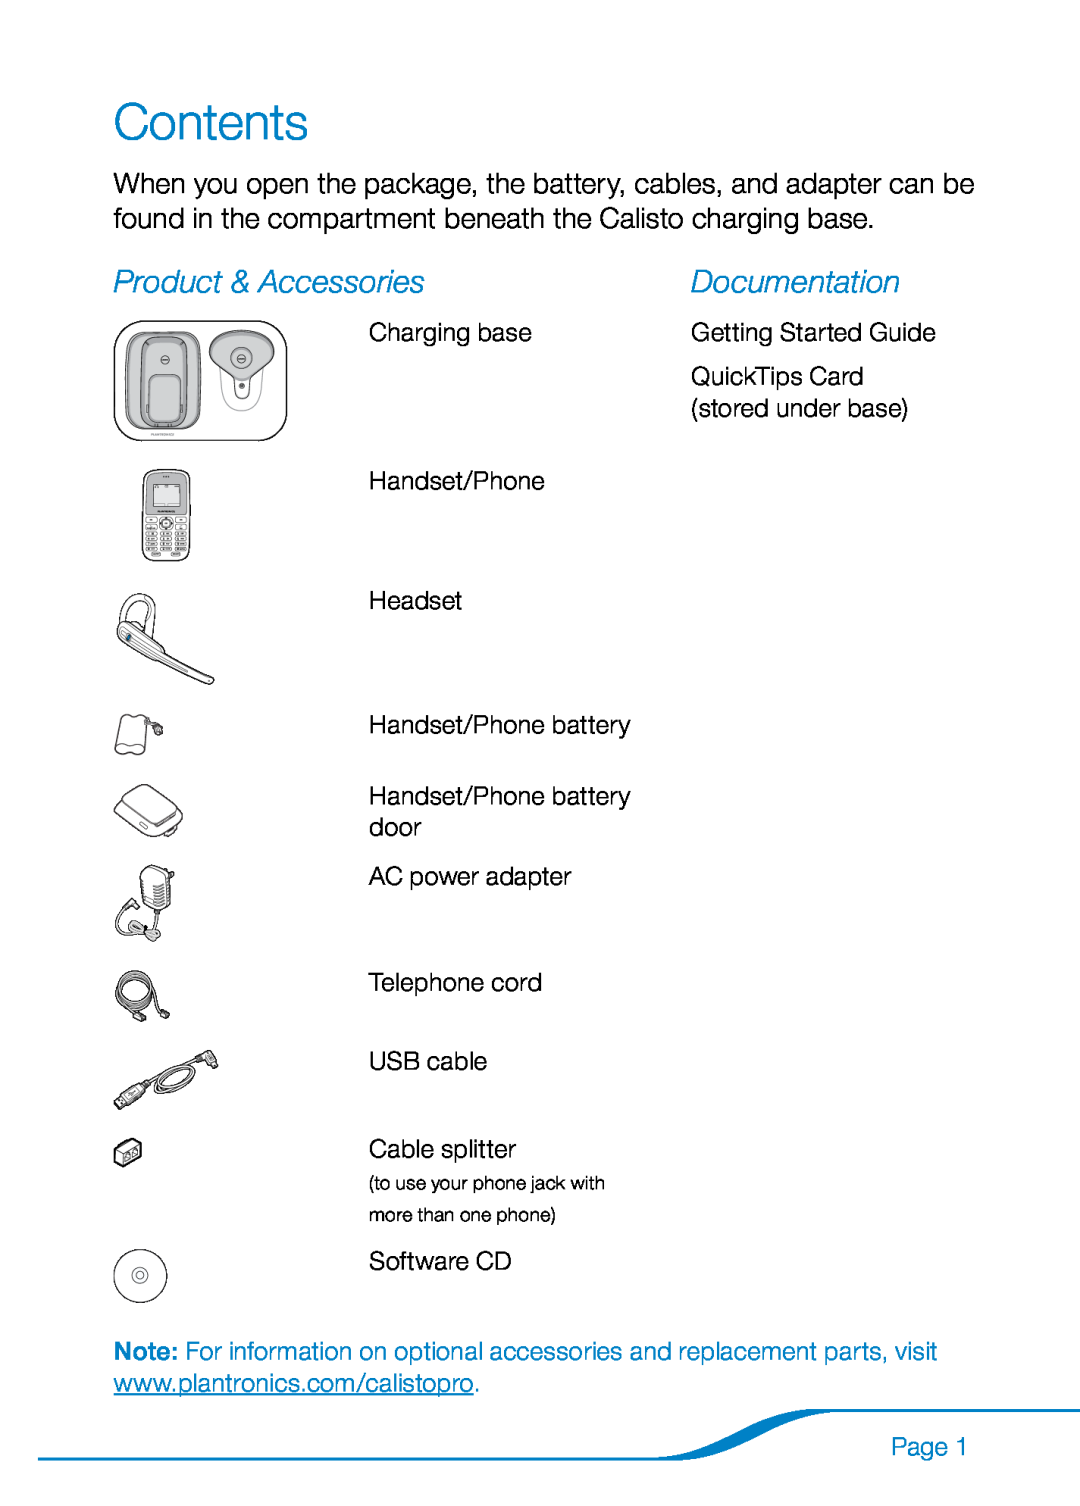 Plantronics 655 Product & Accessories, Documentation, Contents, Page, to use your phone jack with more than one phone 